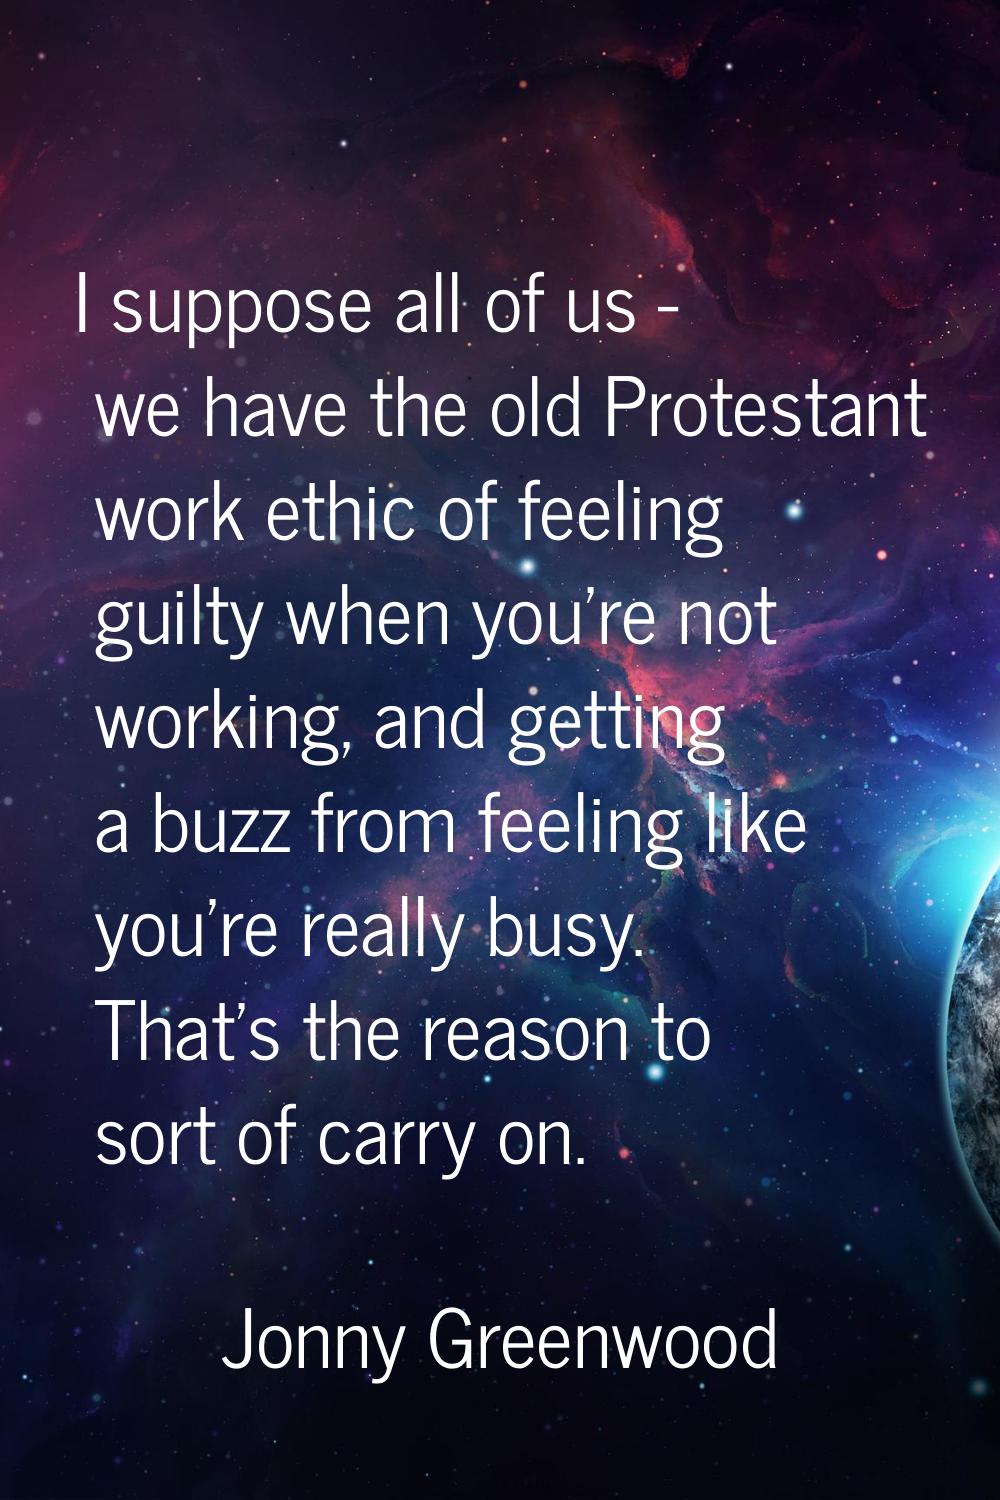 I suppose all of us - we have the old Protestant work ethic of feeling guilty when you're not worki